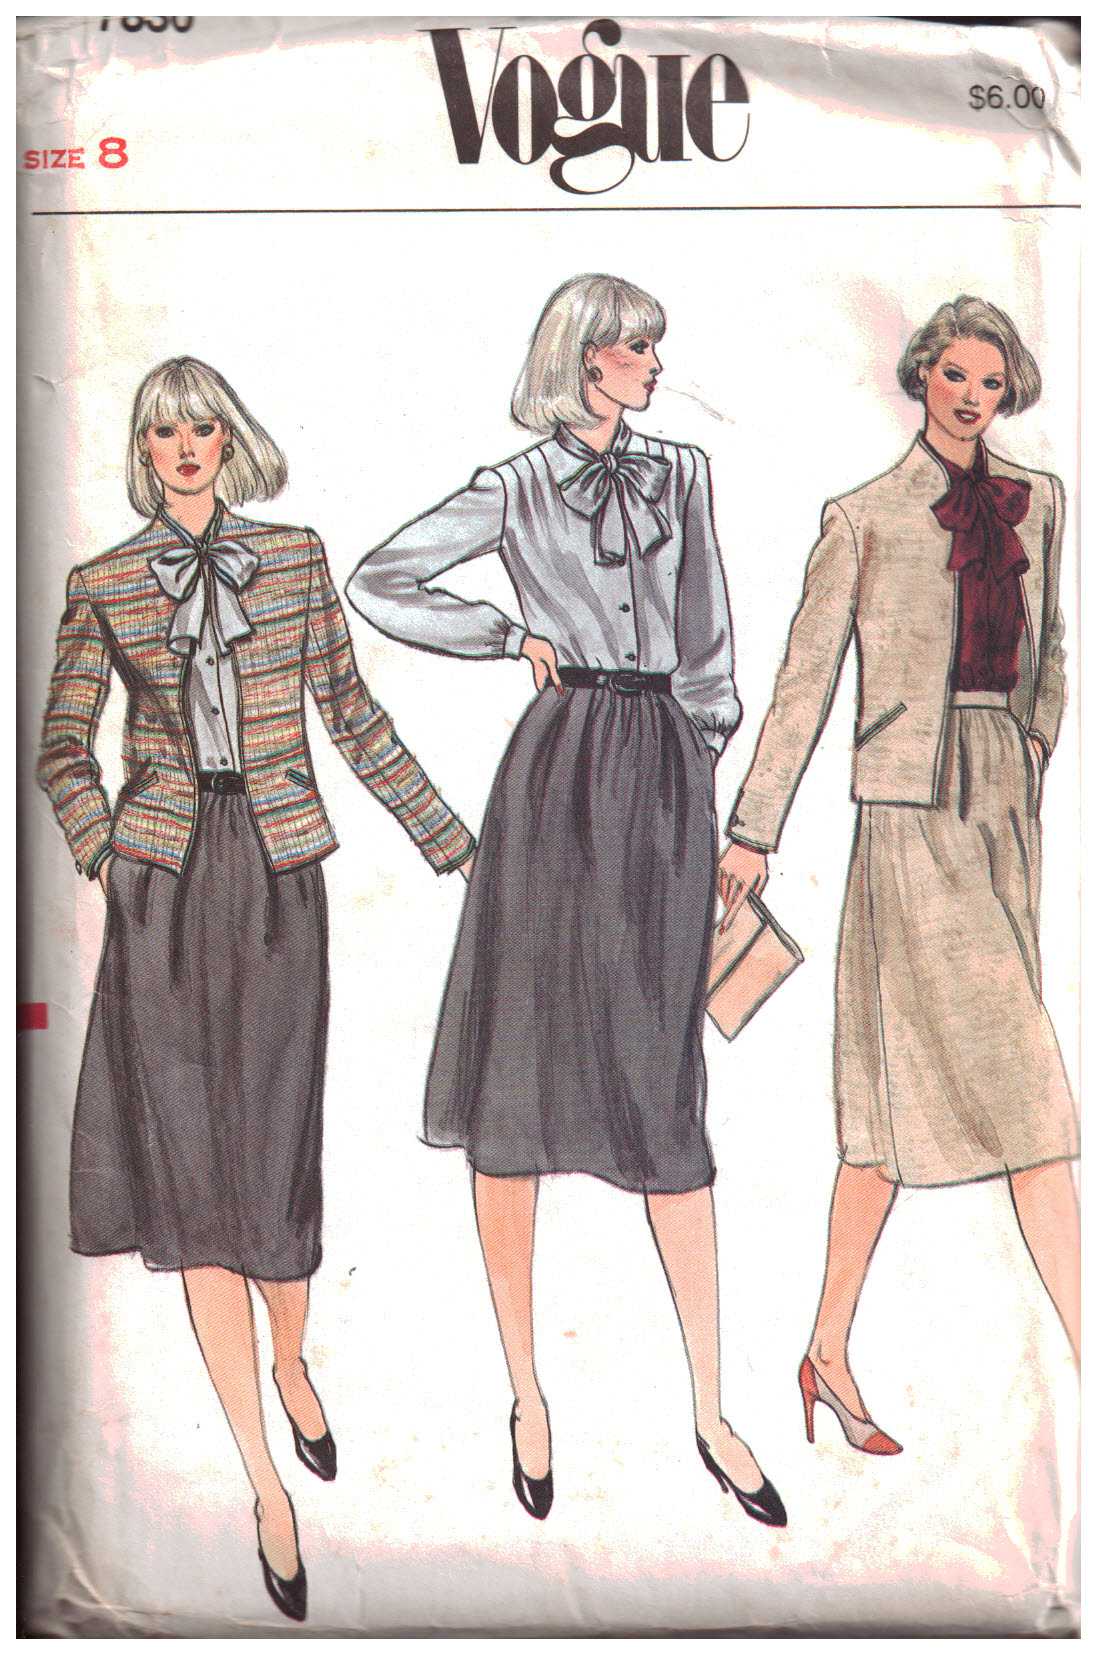 Vogue 7830 Misses' Jacket, Skirt and Blouse Size: 8 Used Sewing Pattern